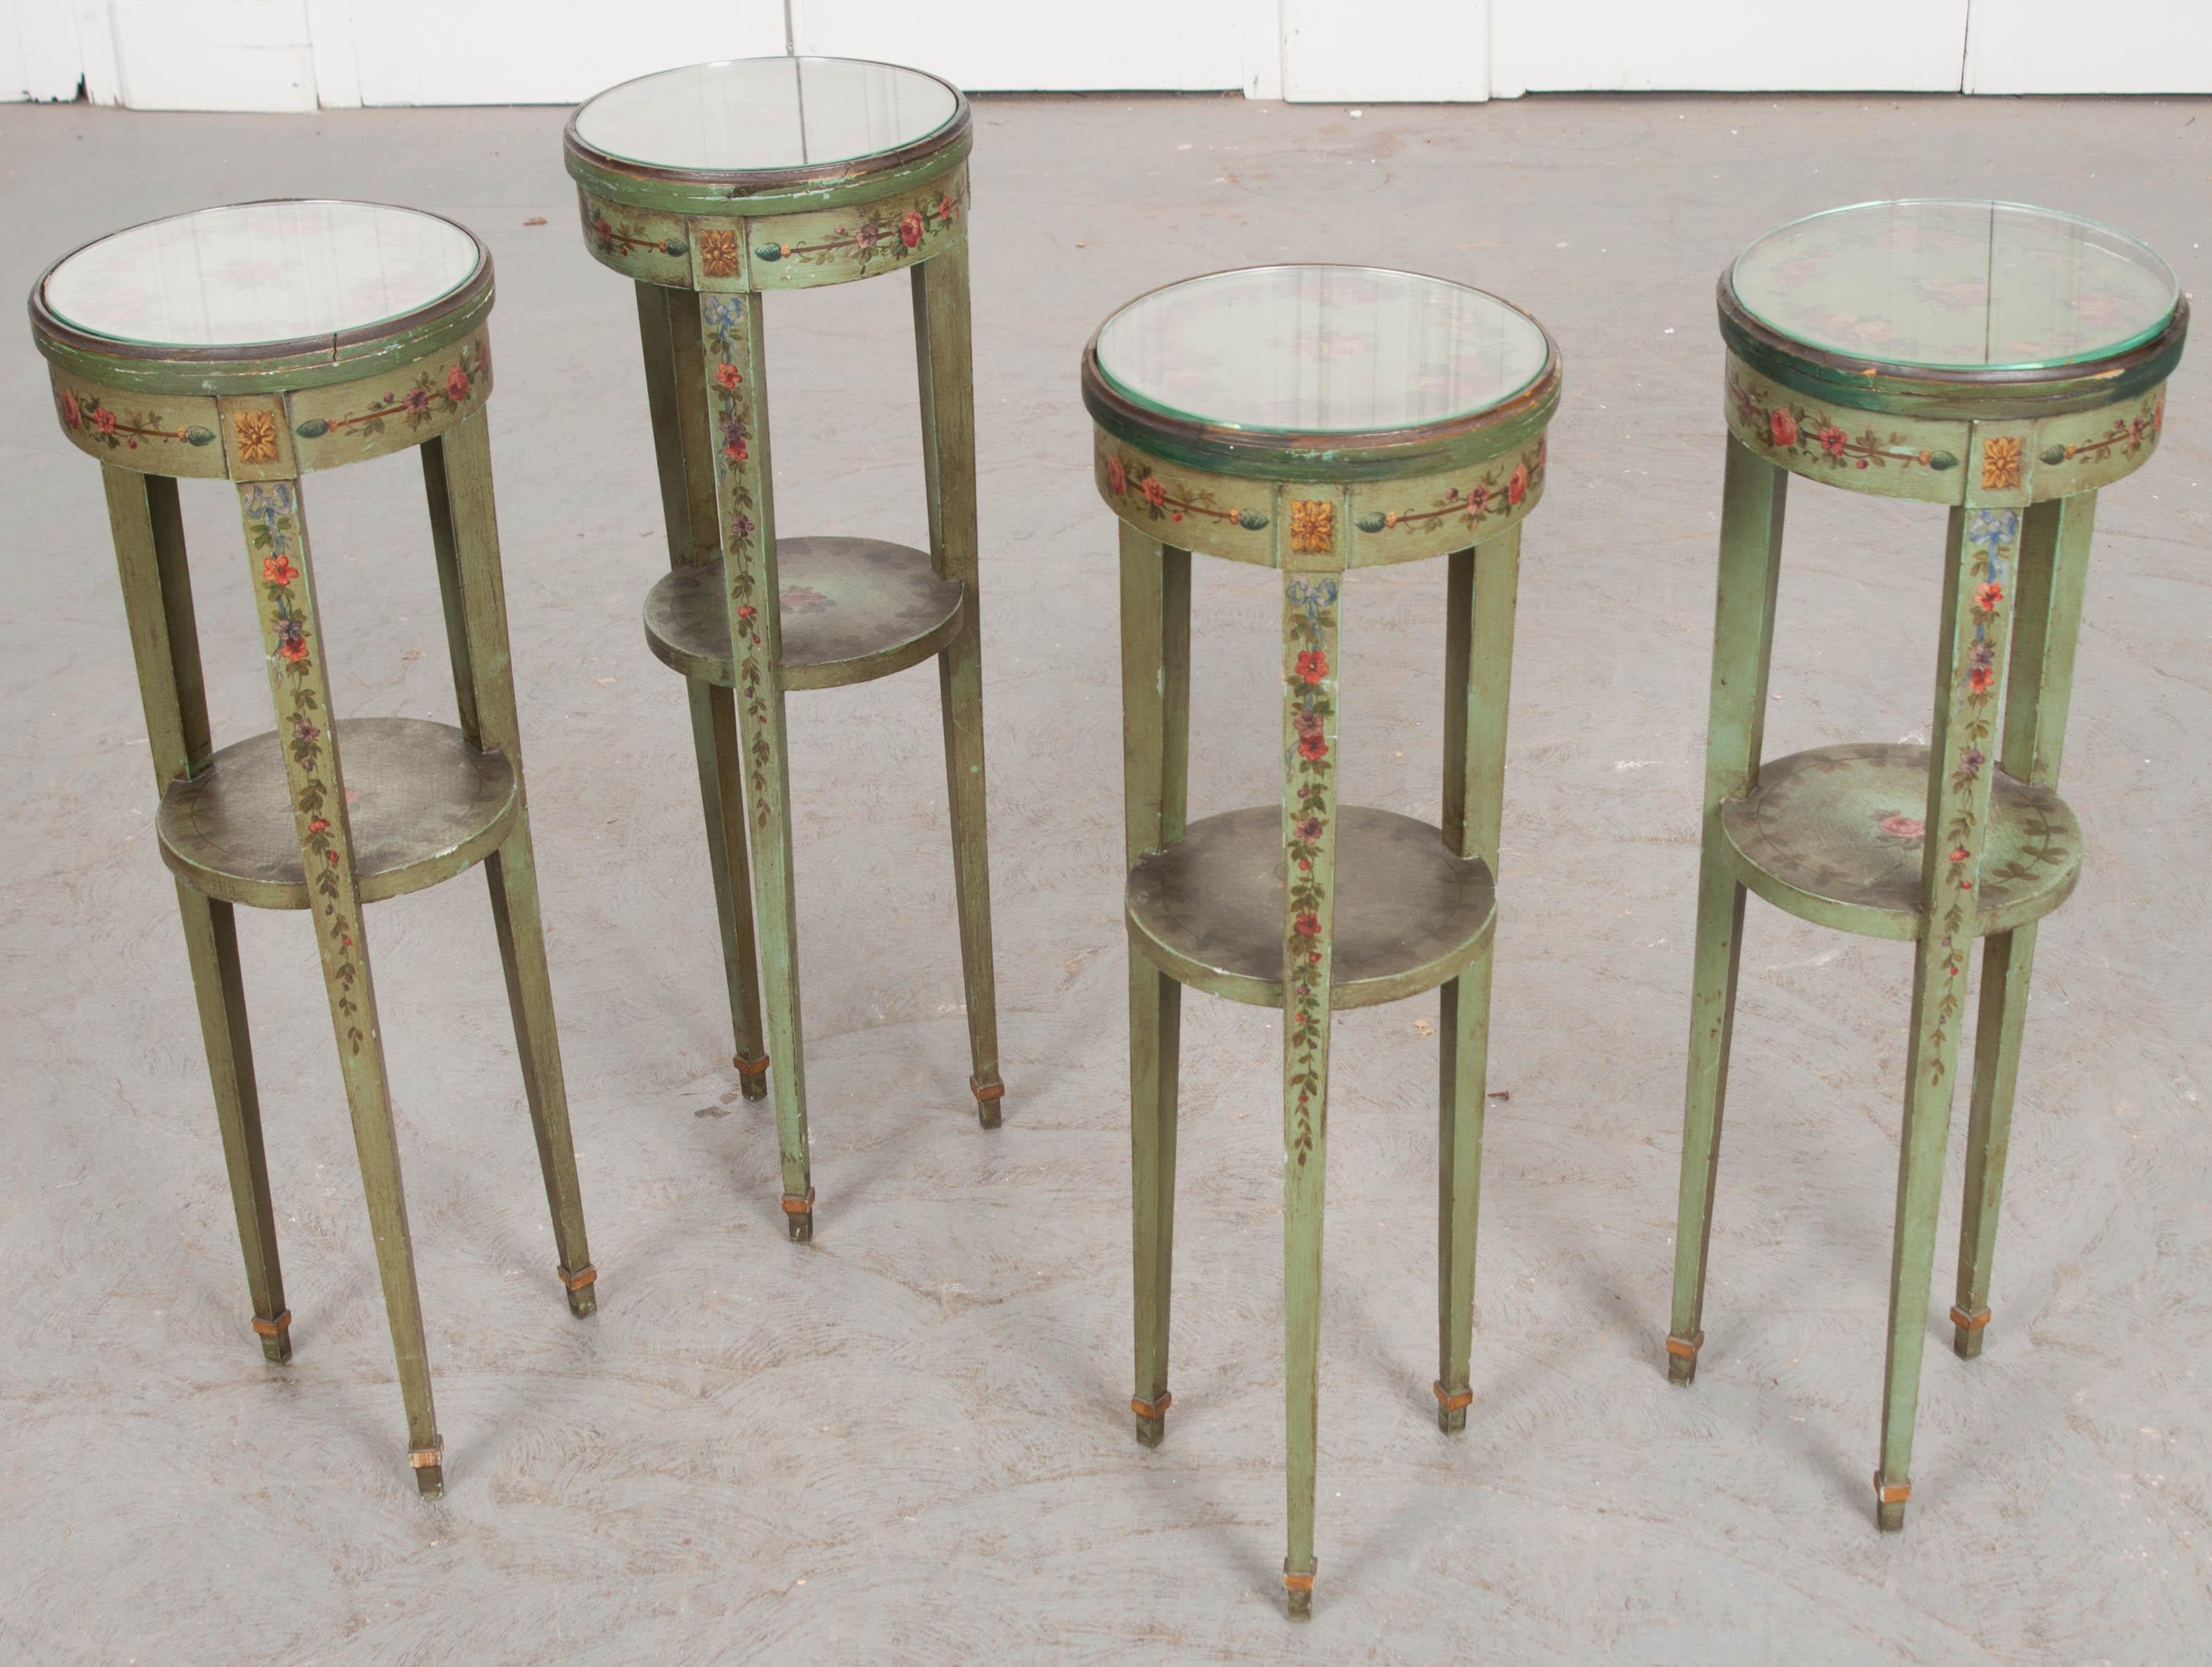 A cheerful set of four hand painted drink tables, with glass tops, from 19th century France. These friendly little tables provide wonderful places to place a drink while seated. Placed beside chairs or sofas, these wonderful little tables are great